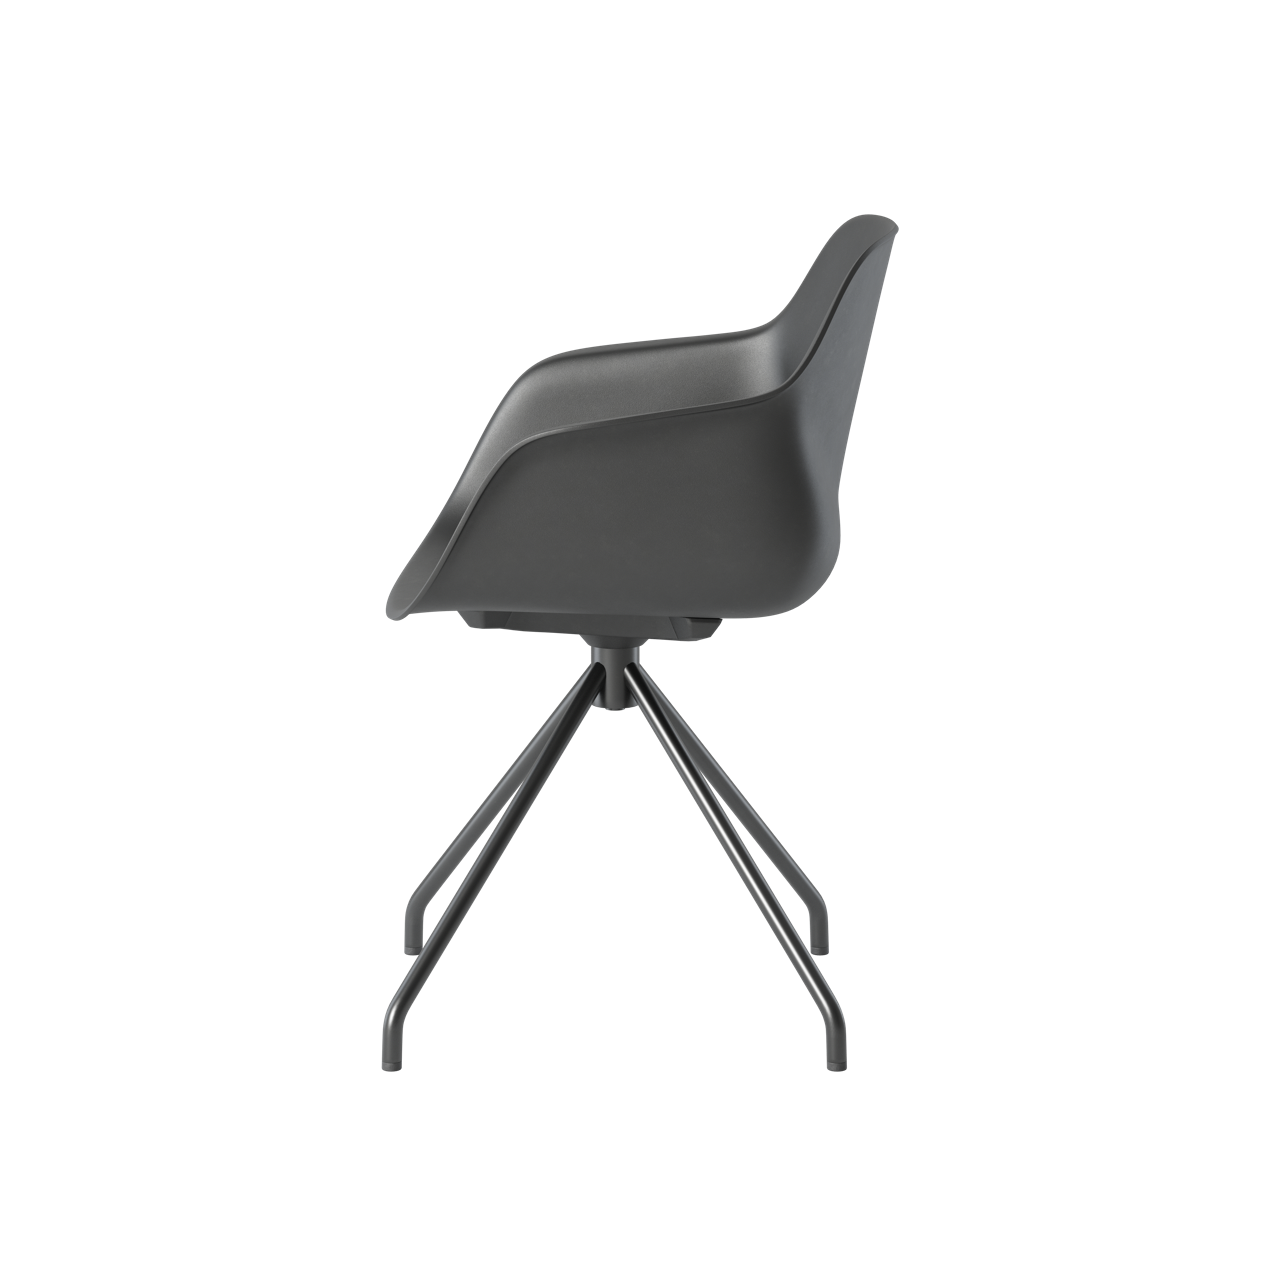 OCEE&FOUR – Chairs – FourMe 11 – Plastic shell - Swivel Frame - Packshot Image 4 Large